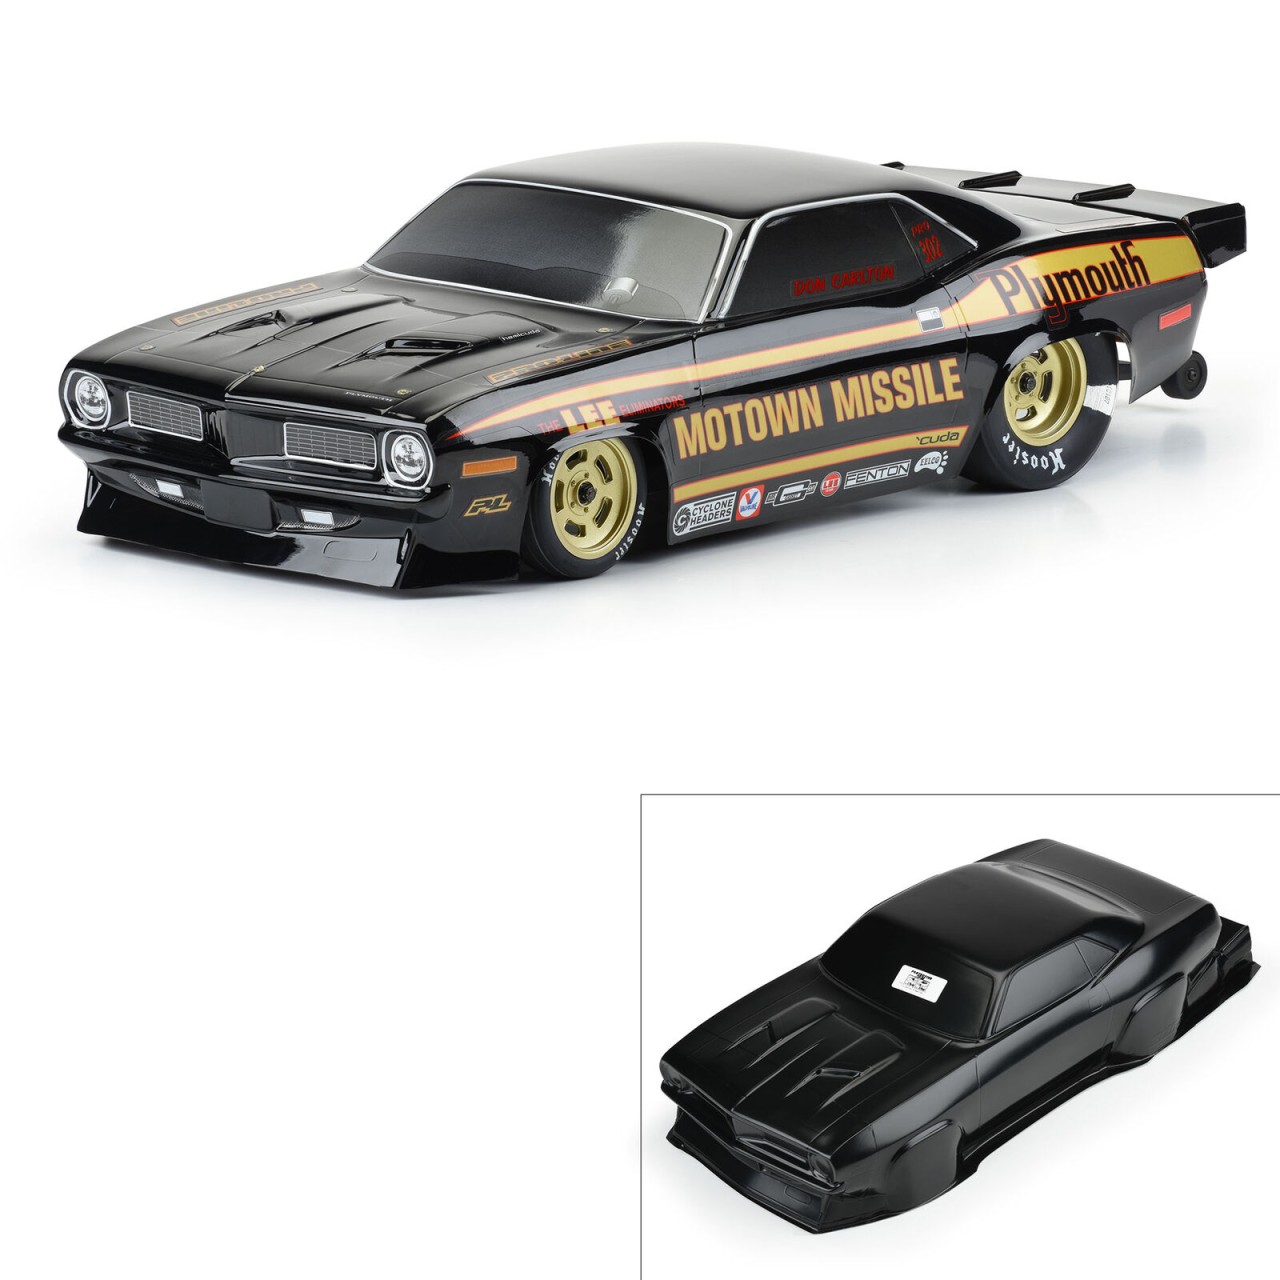 ProLine 3550-18 - 1972 Plymouth Barracuda - Drag Body Set for Slash 2WD / Asso DR10 - Motown Missile 